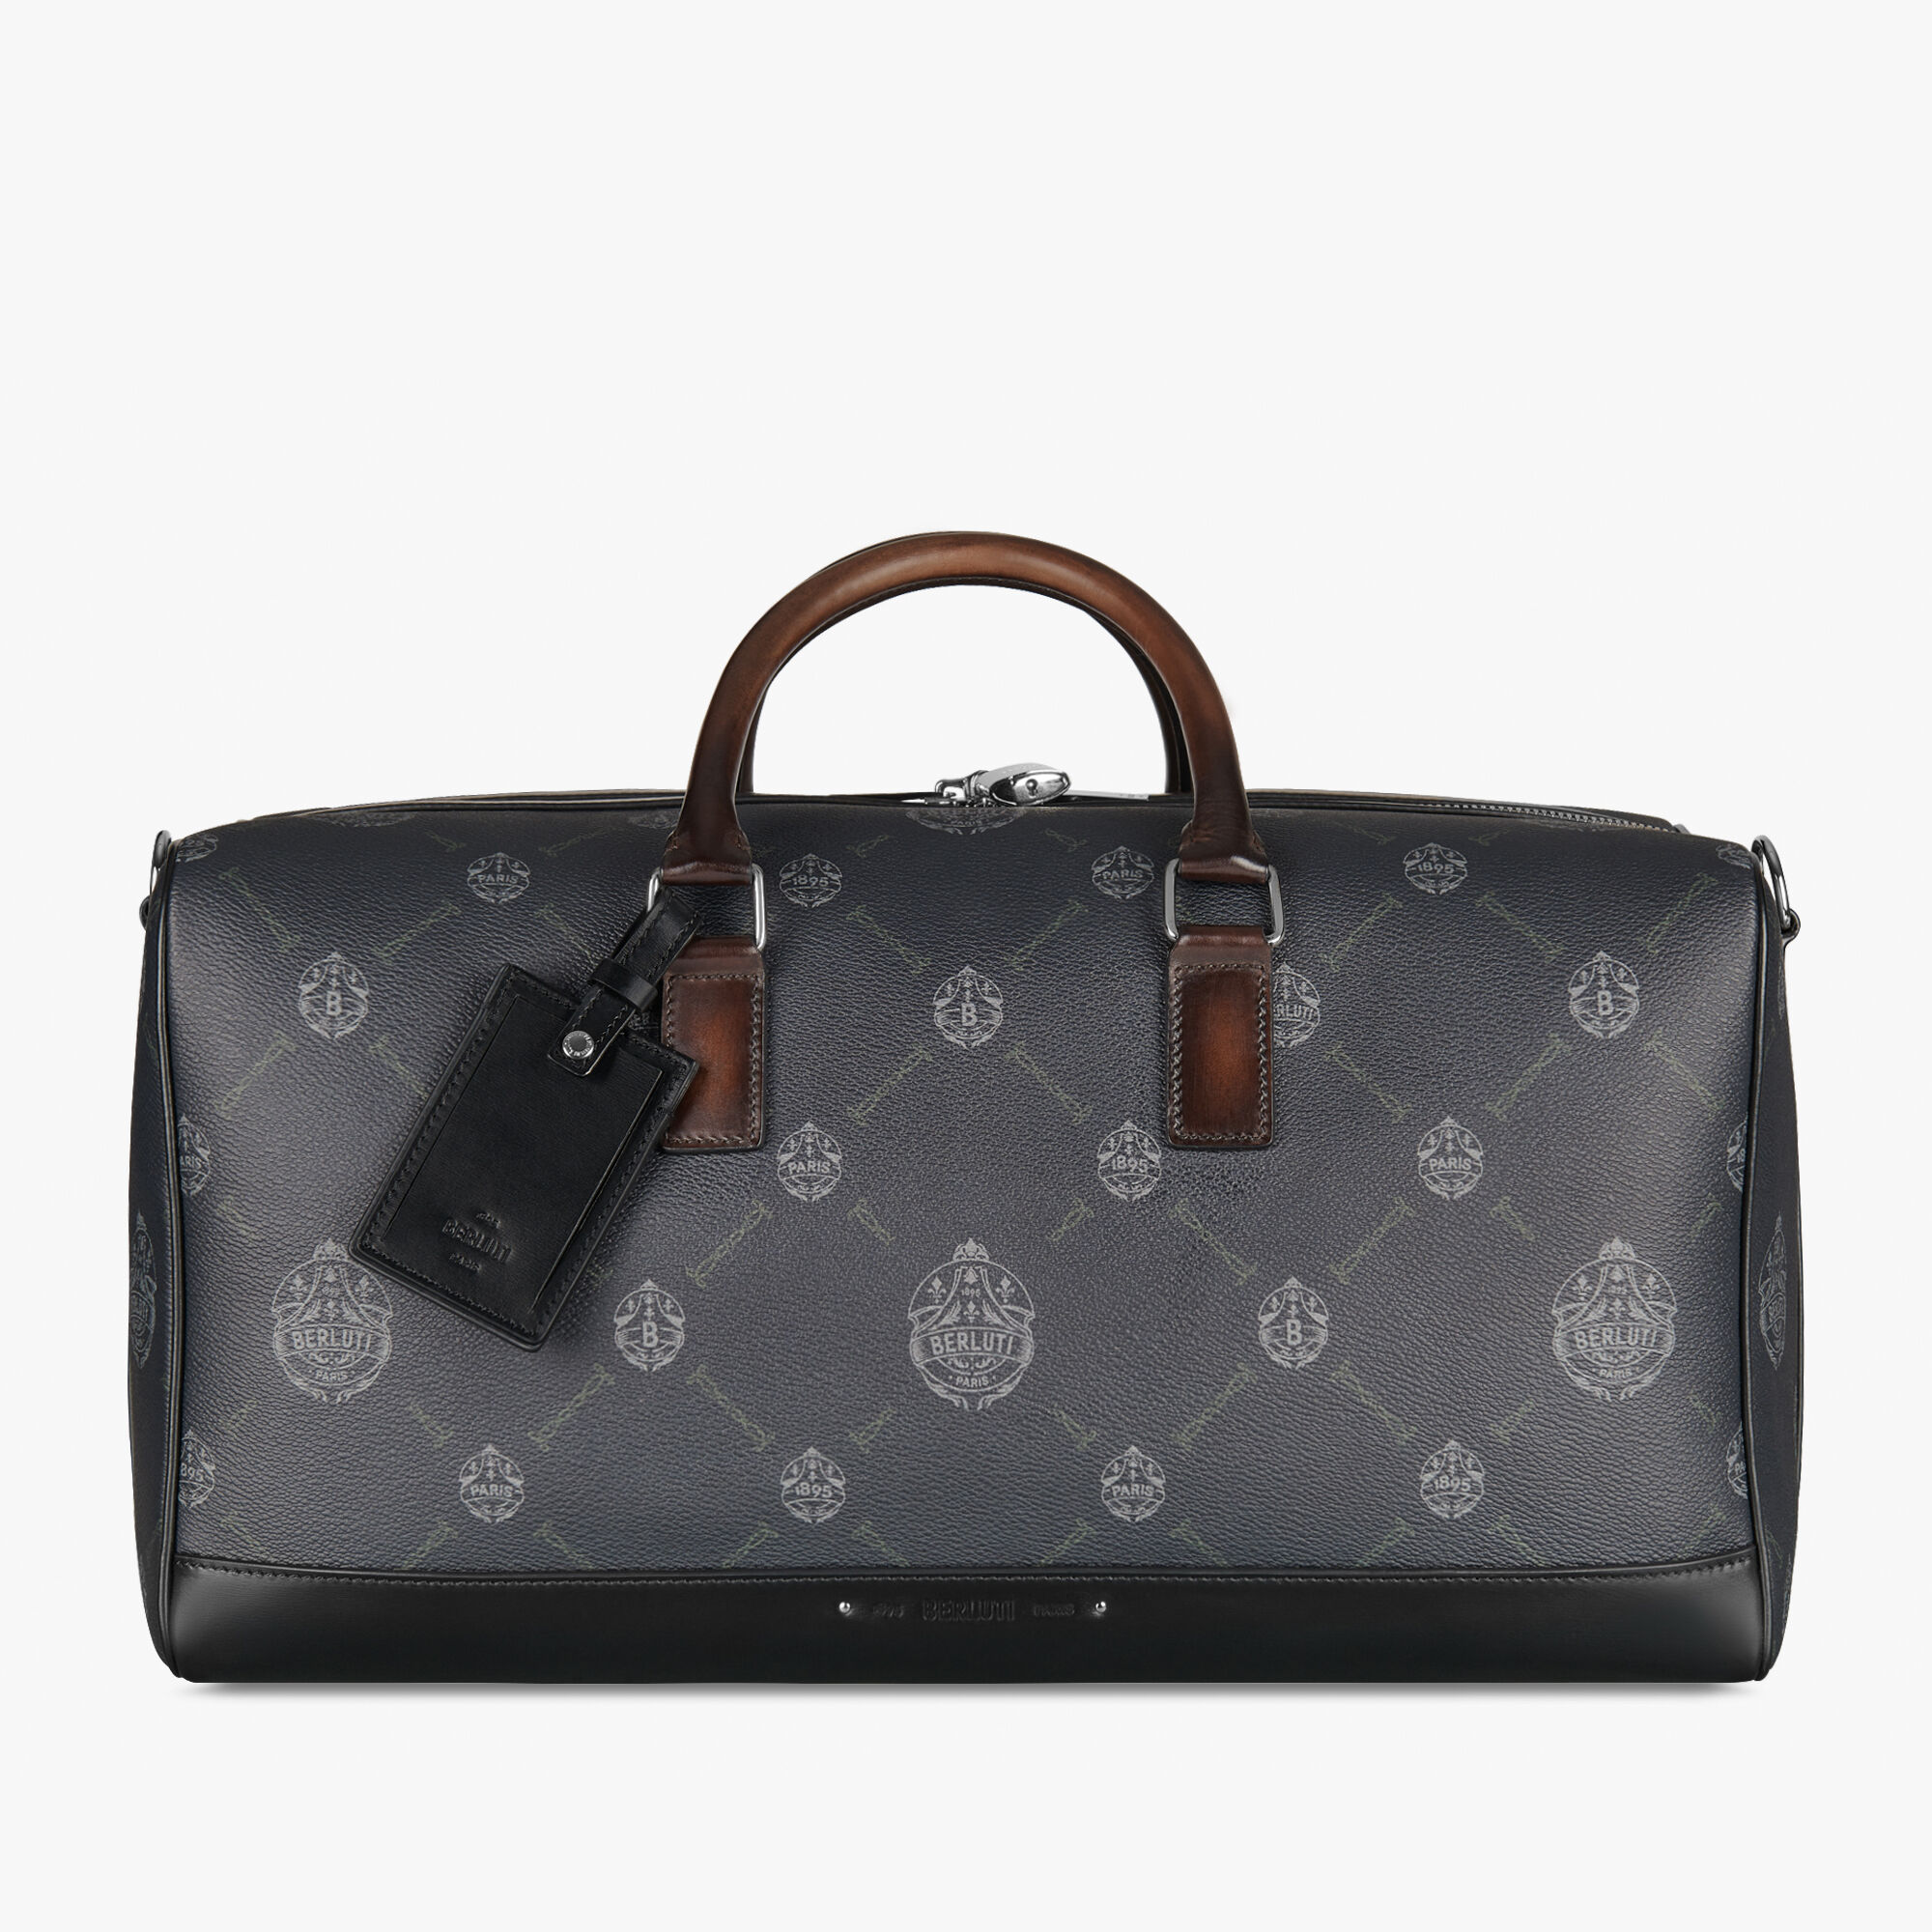 Travel bag collections by Berluti - IT